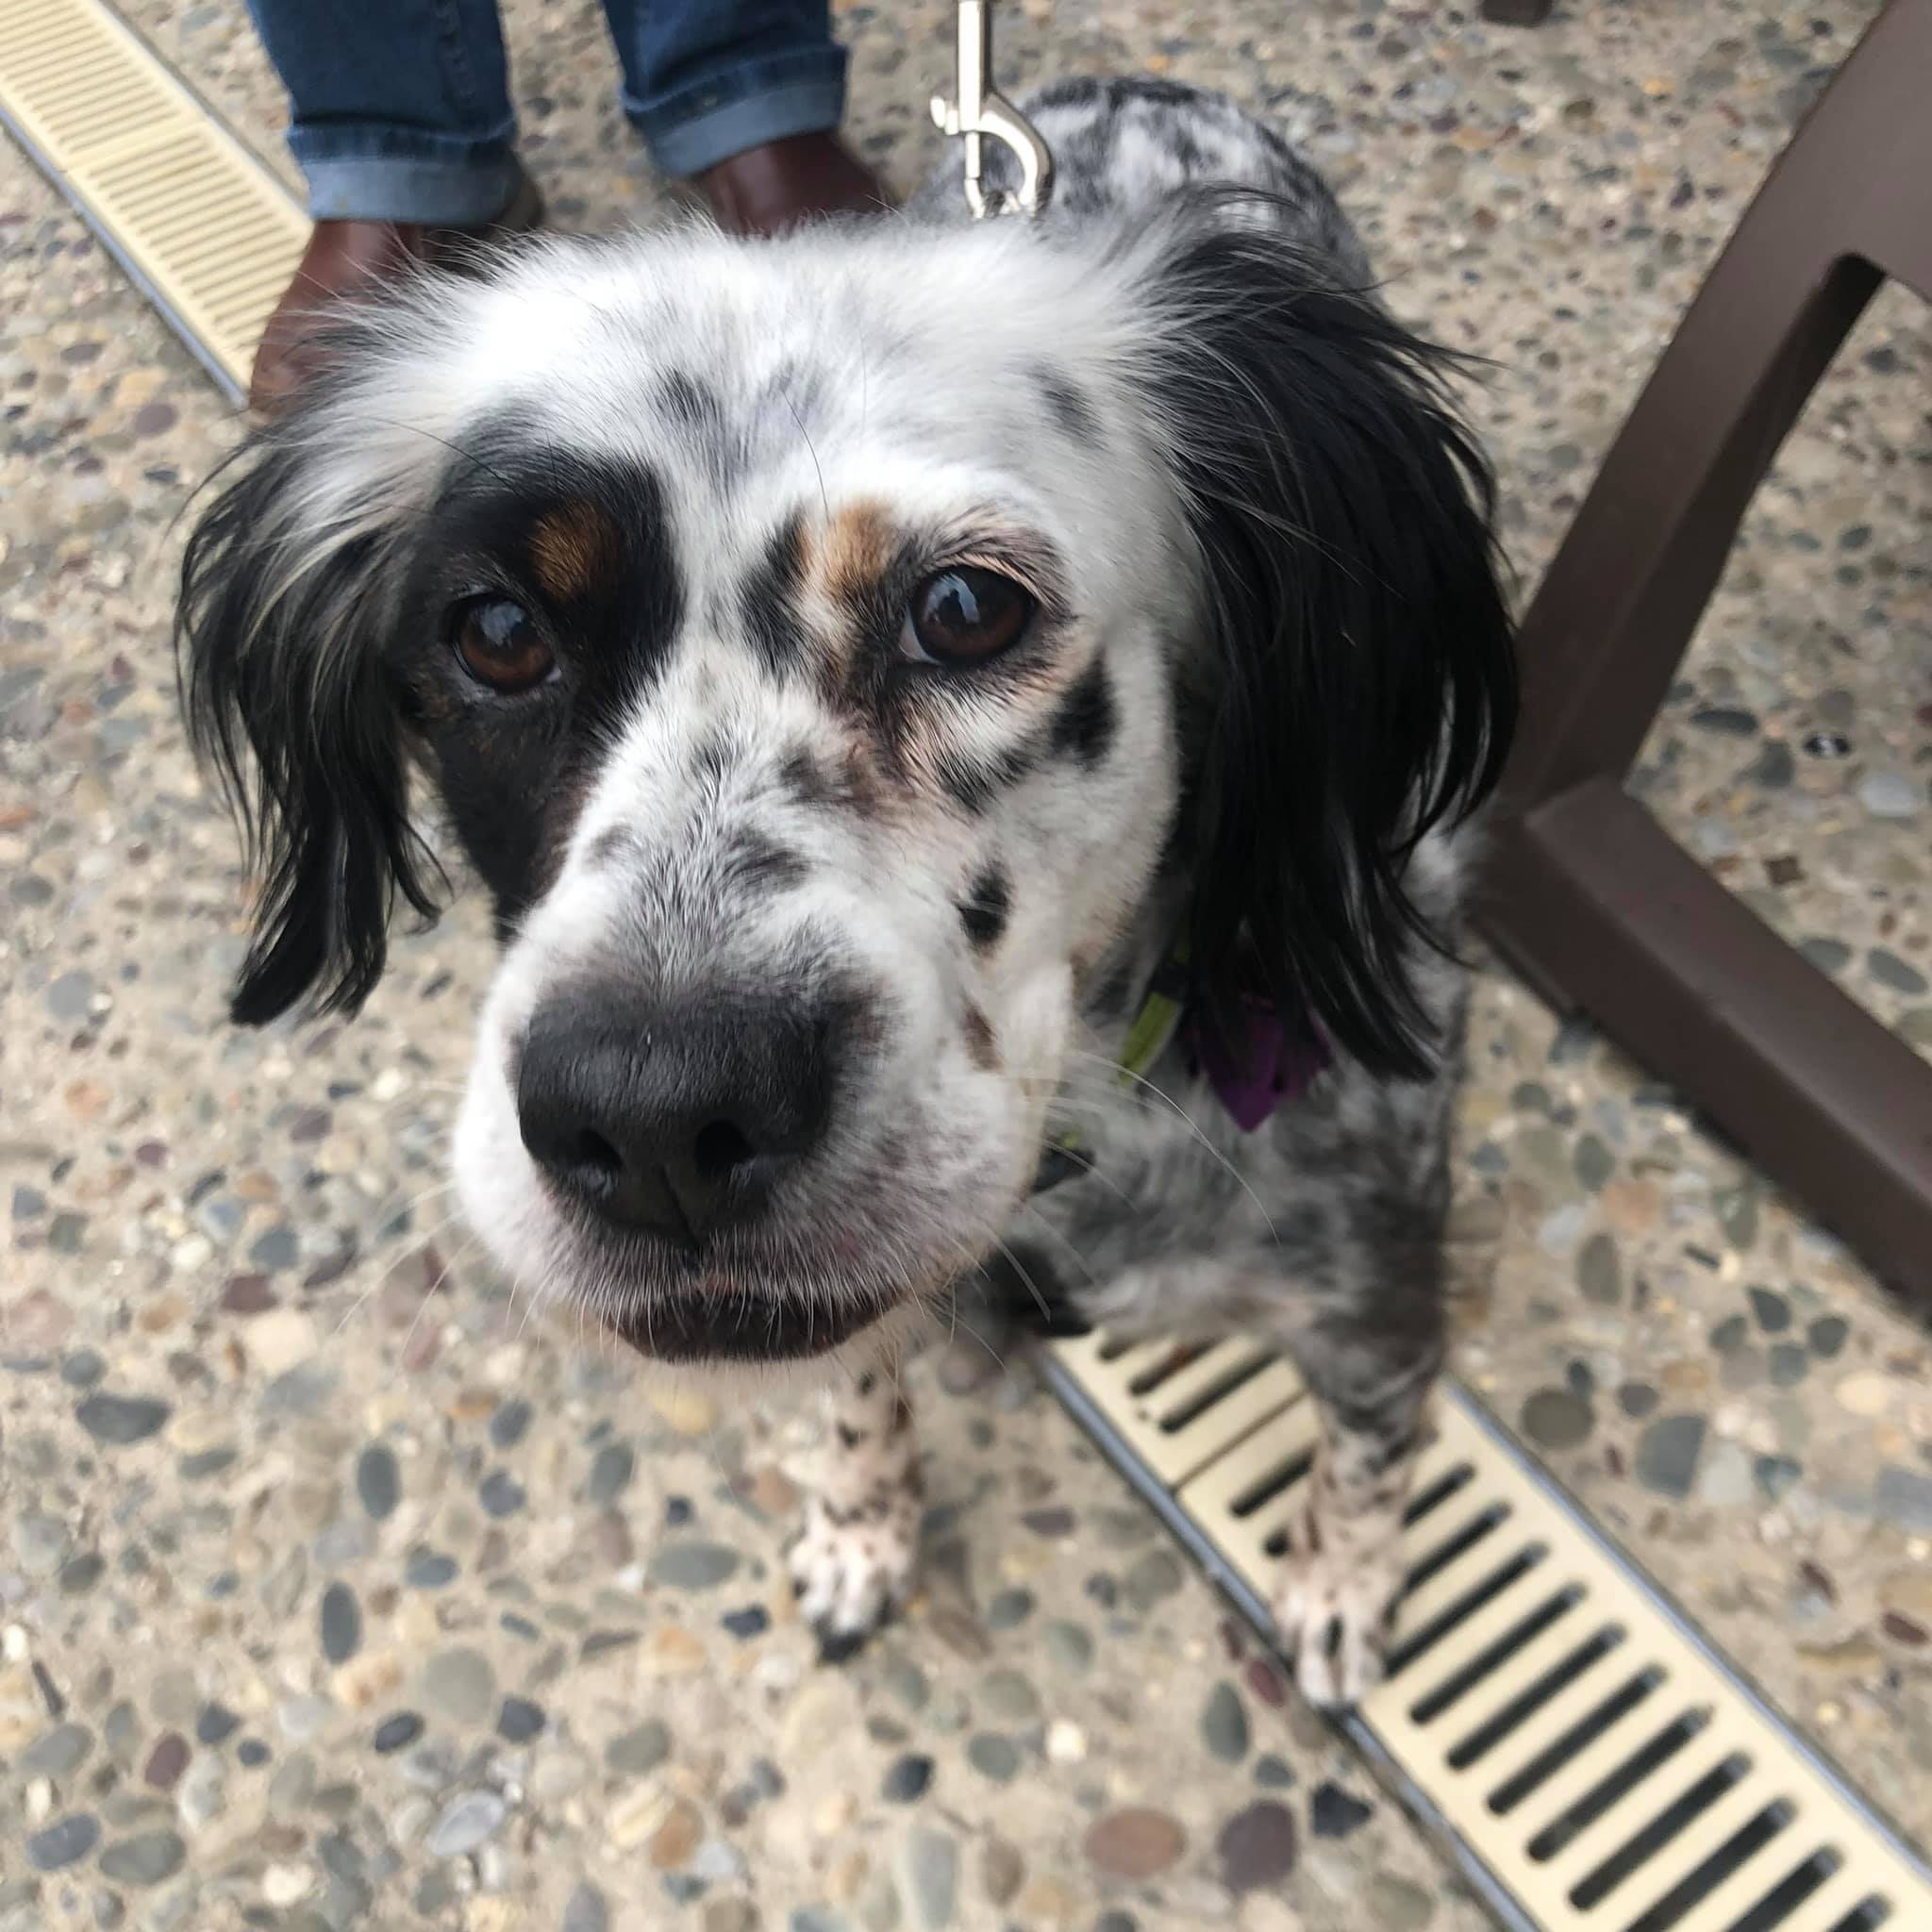 Spotted spaniel mix looking at camera